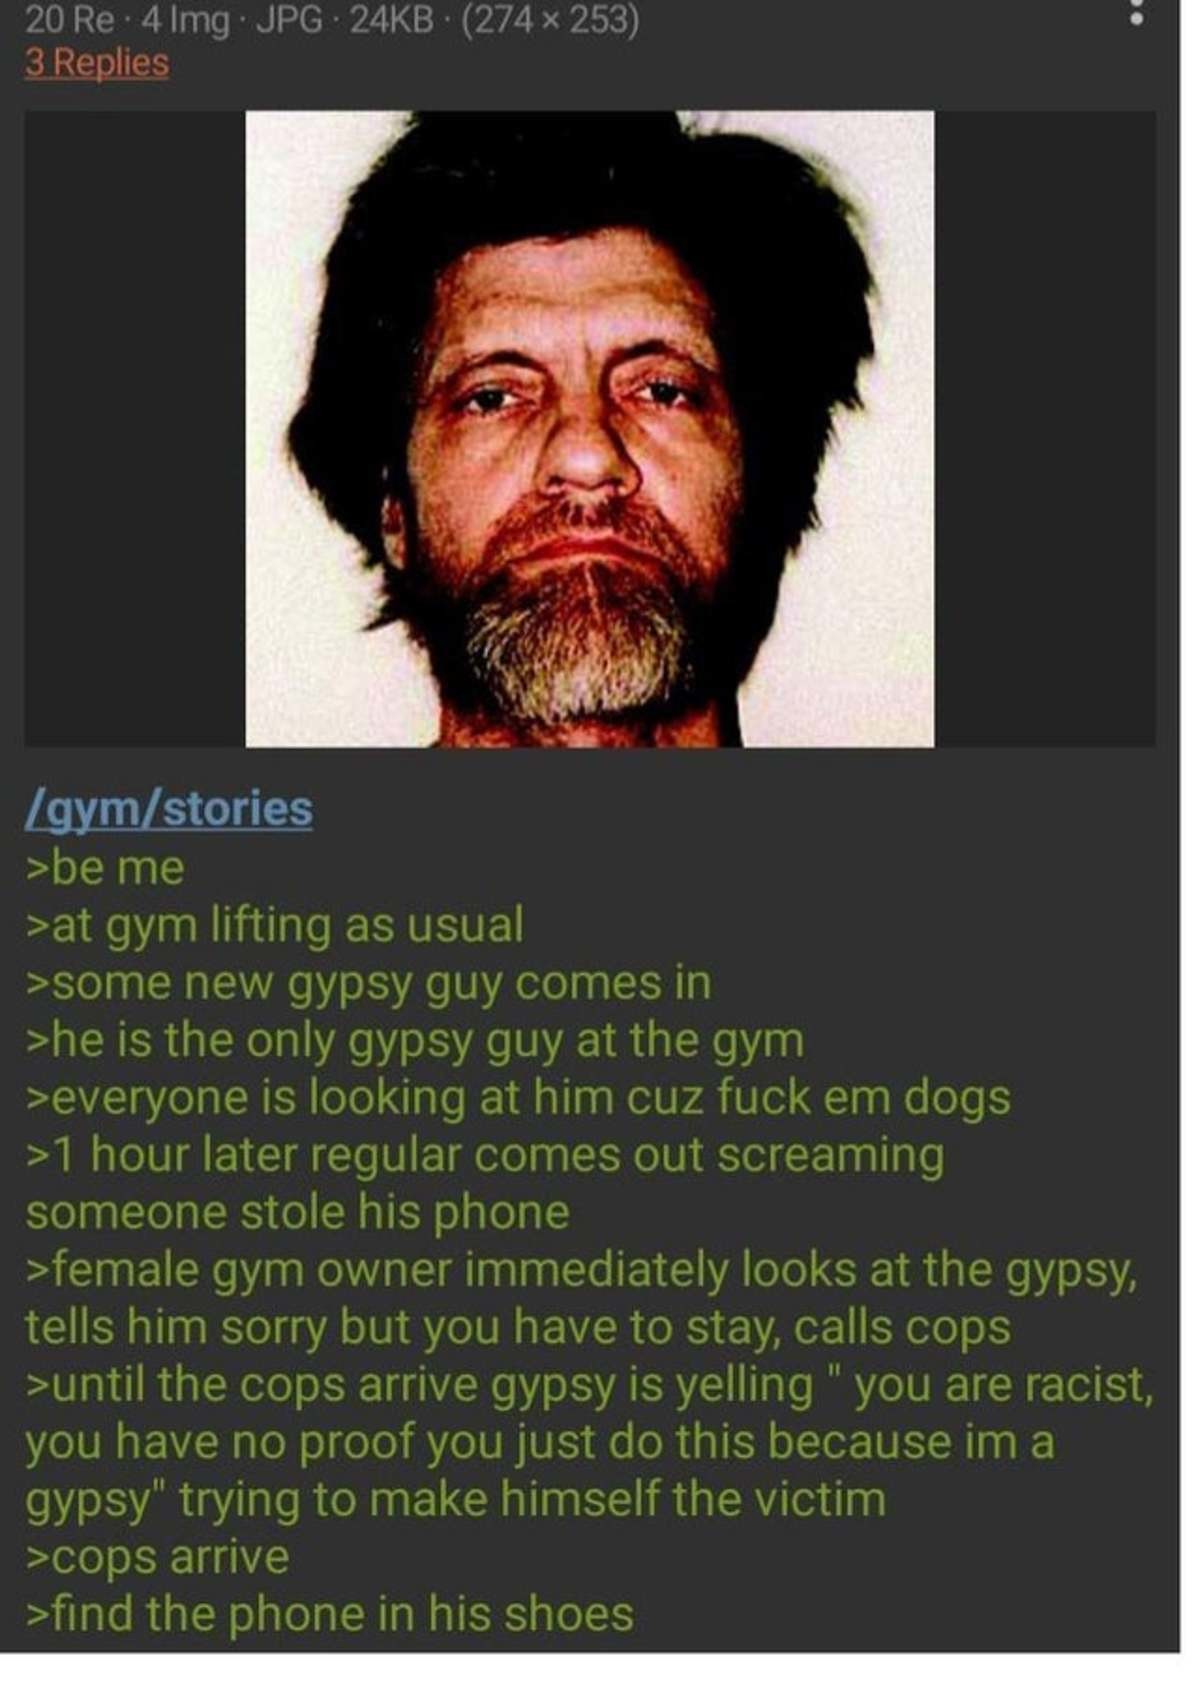 Anon's Gym Story. .. One day I hope to know love that is half as passionate as the typical European's hatred for gypsies